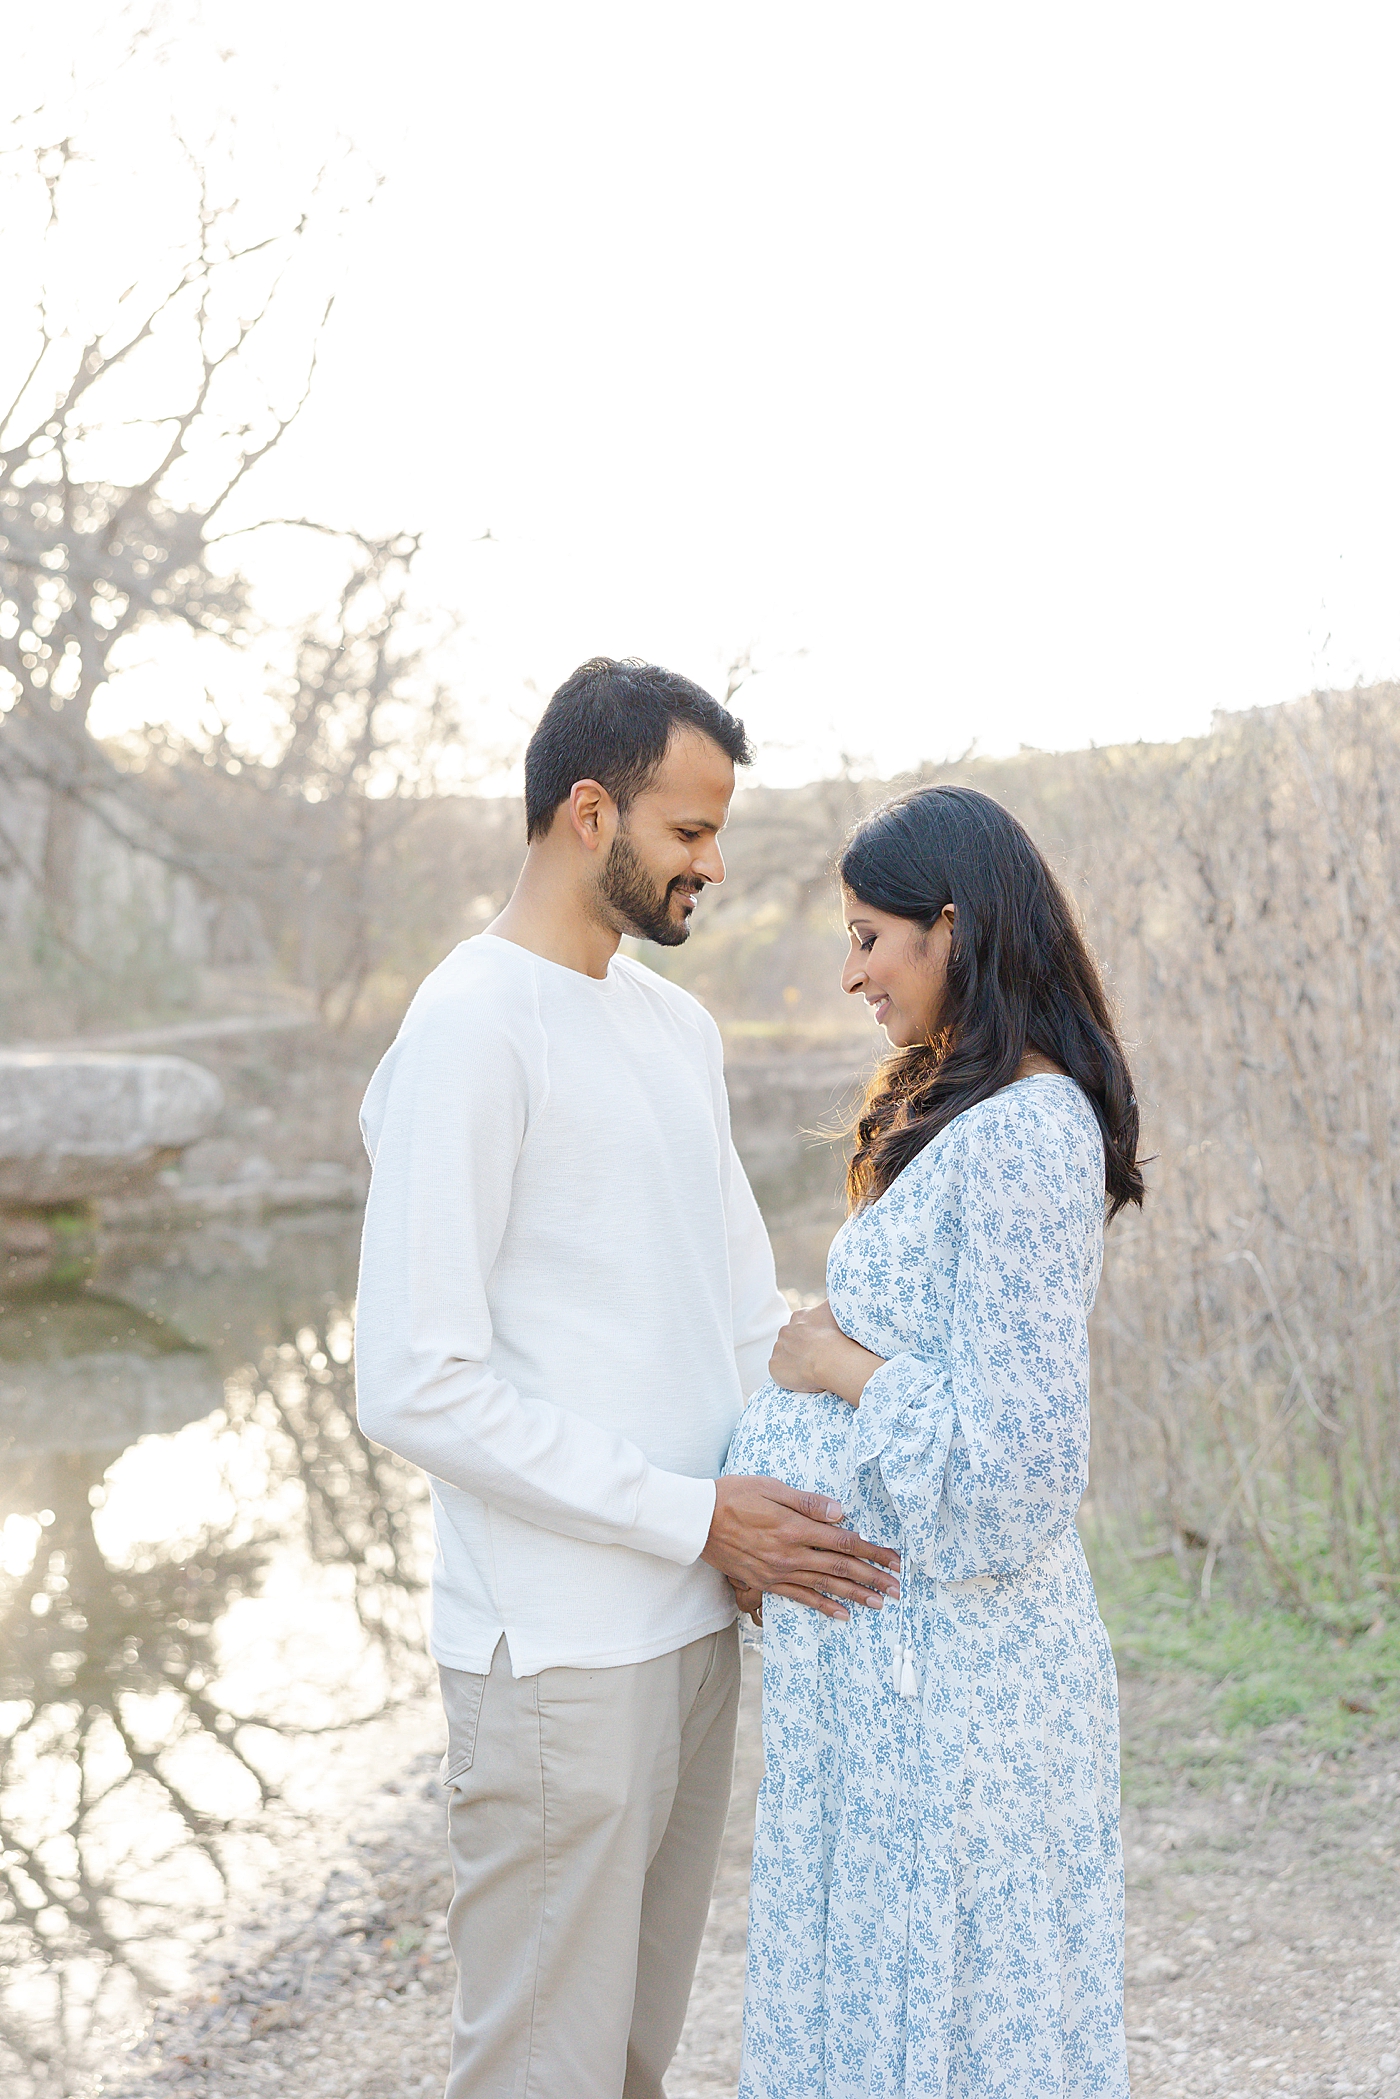 Mom and dad holding mom's belly during their Austin Maternity Session| Images by Sana Ahmed 